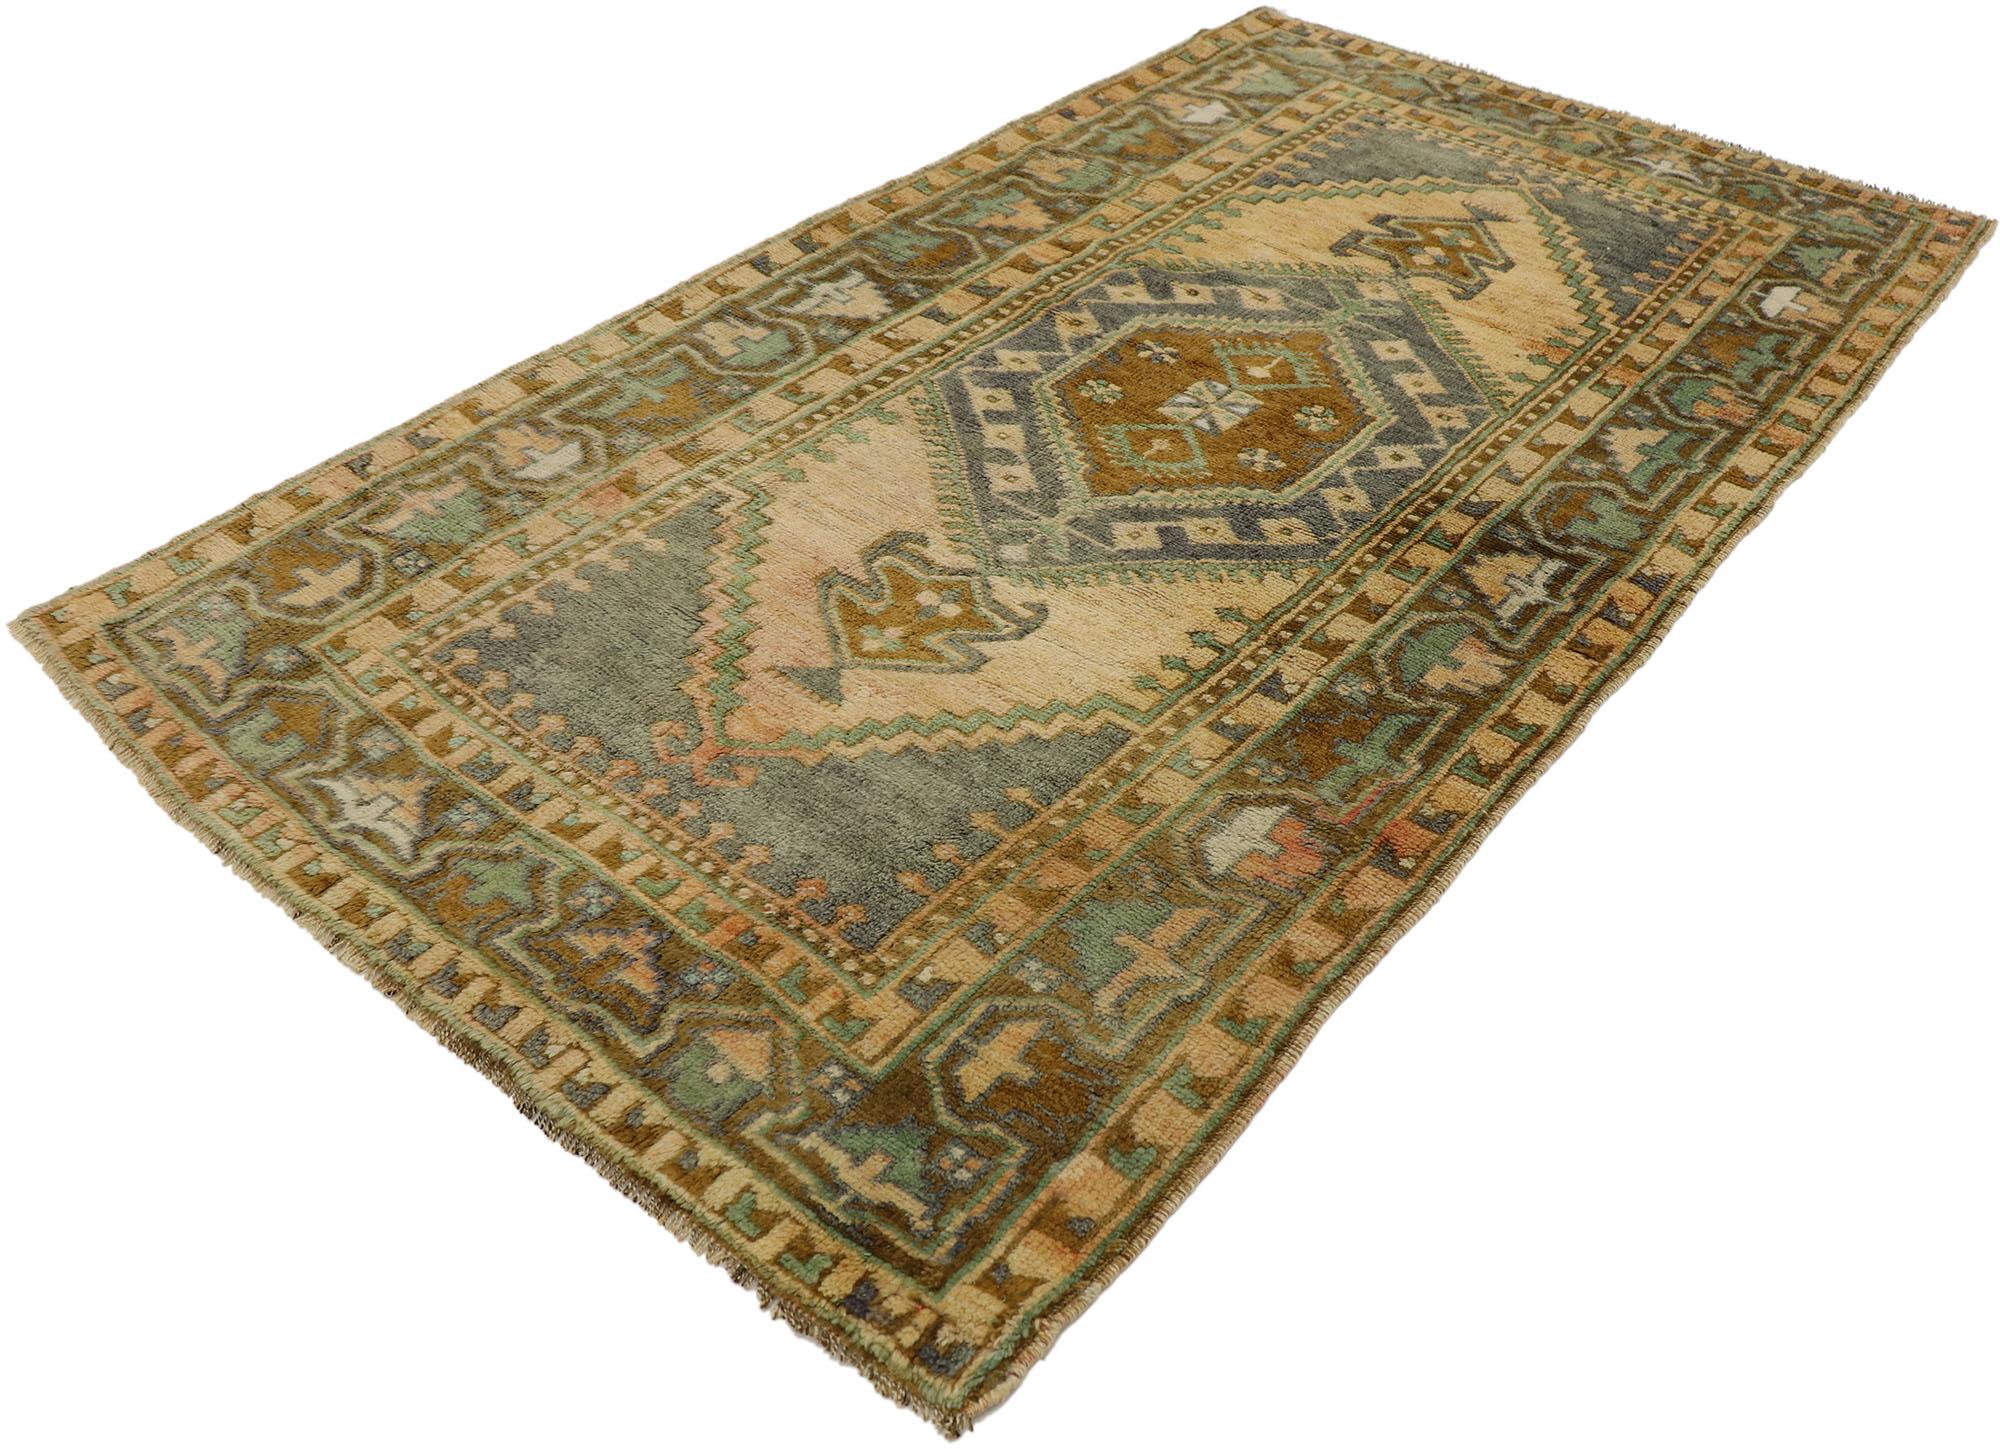 53184 vintage Turkish Oushak rug with Mid-Century Modern Belgian style. Balancing traditional sensibility with a timeless design in earth-tone colors, this hand knotted wool vintage Turkish Oushak rug charms with ease. The abrashed tan backdrop